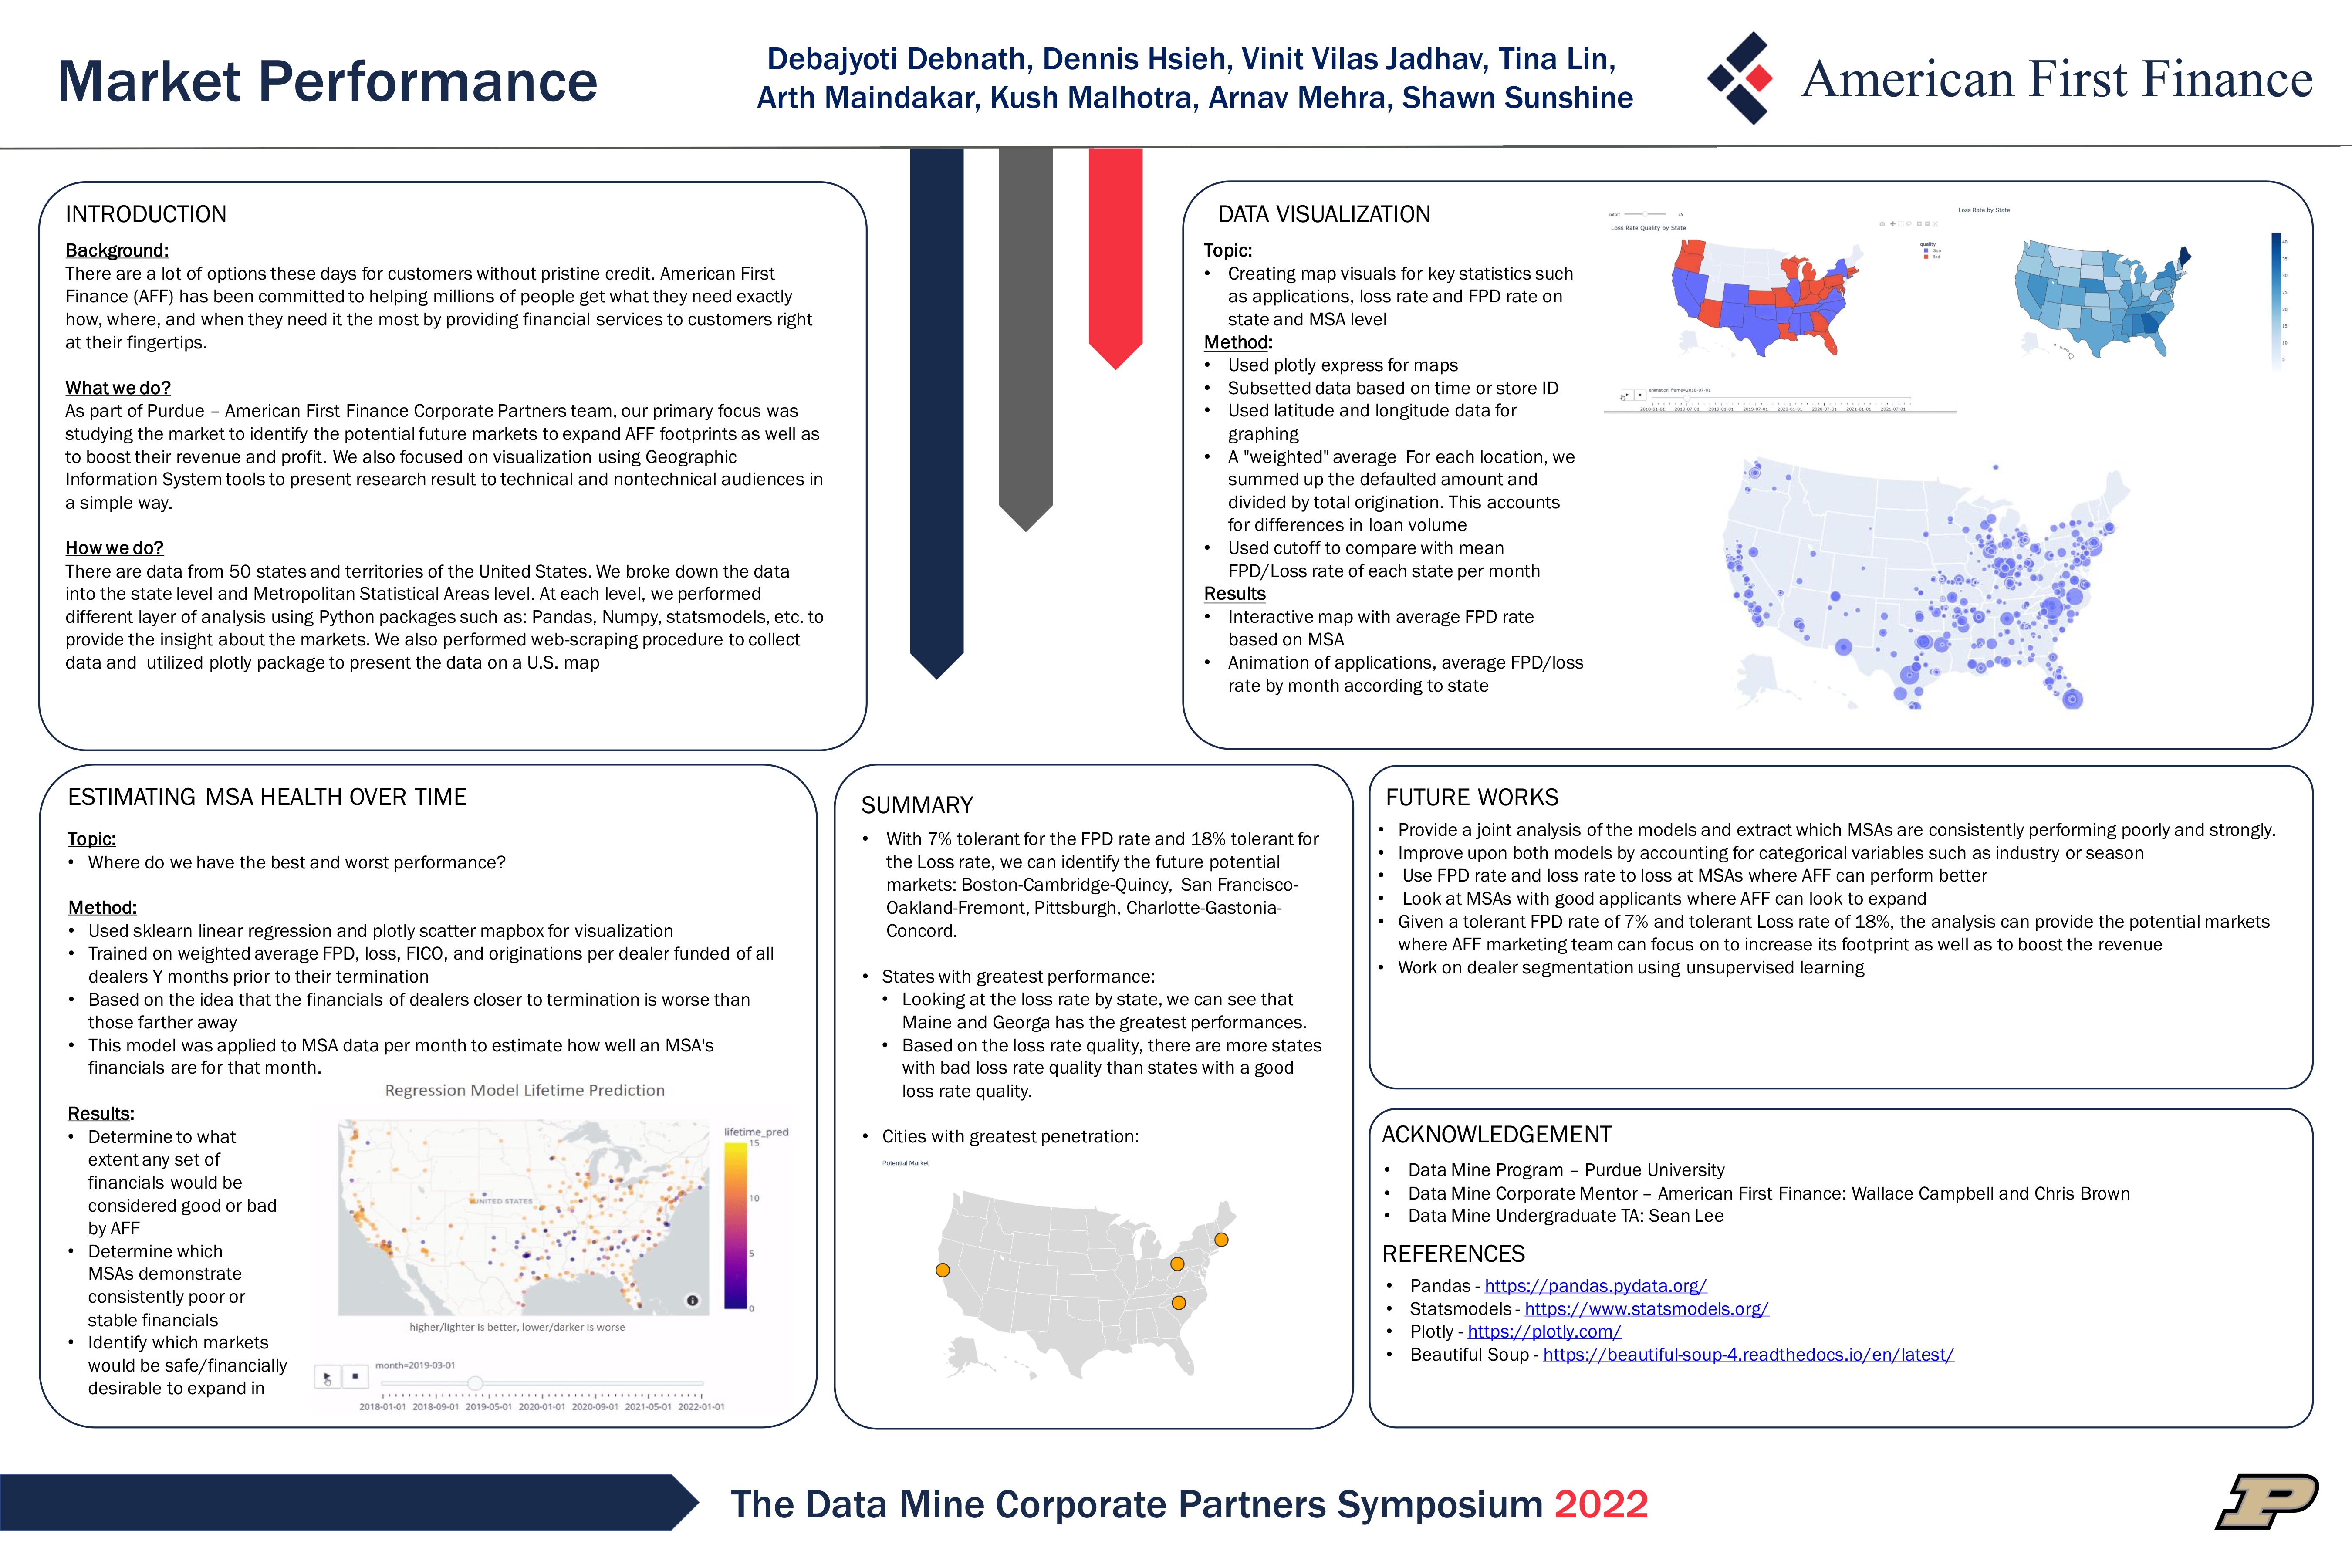 TDM 2022 American First Finance Poster